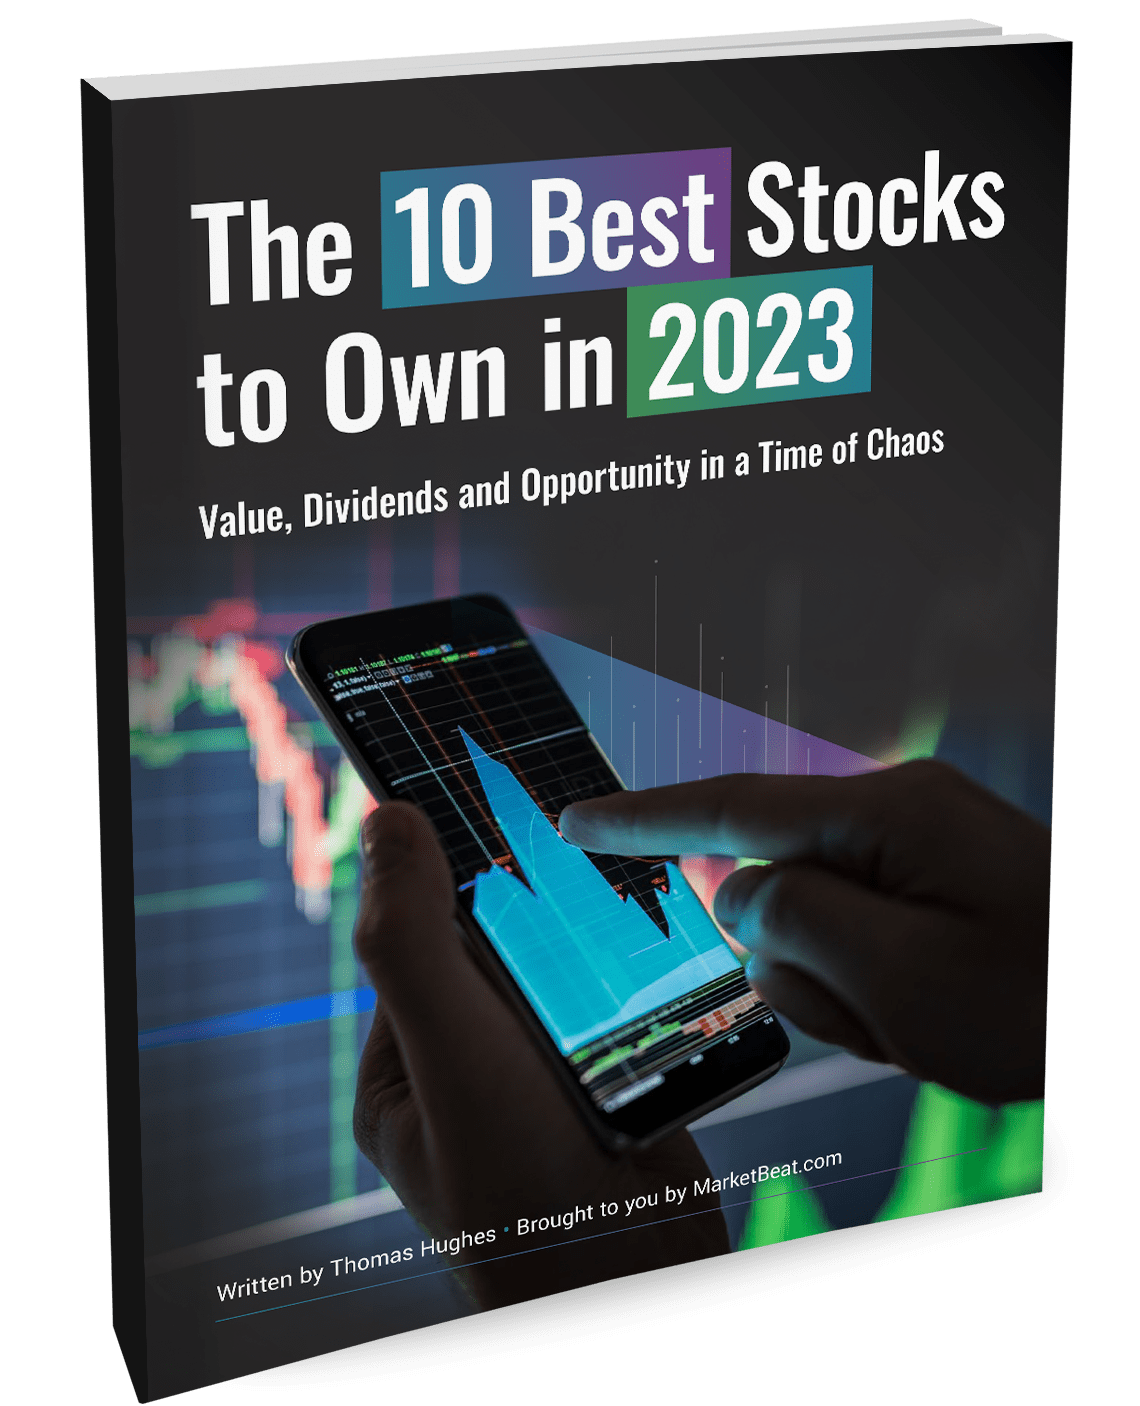 The 10 best stocks to own in 2023